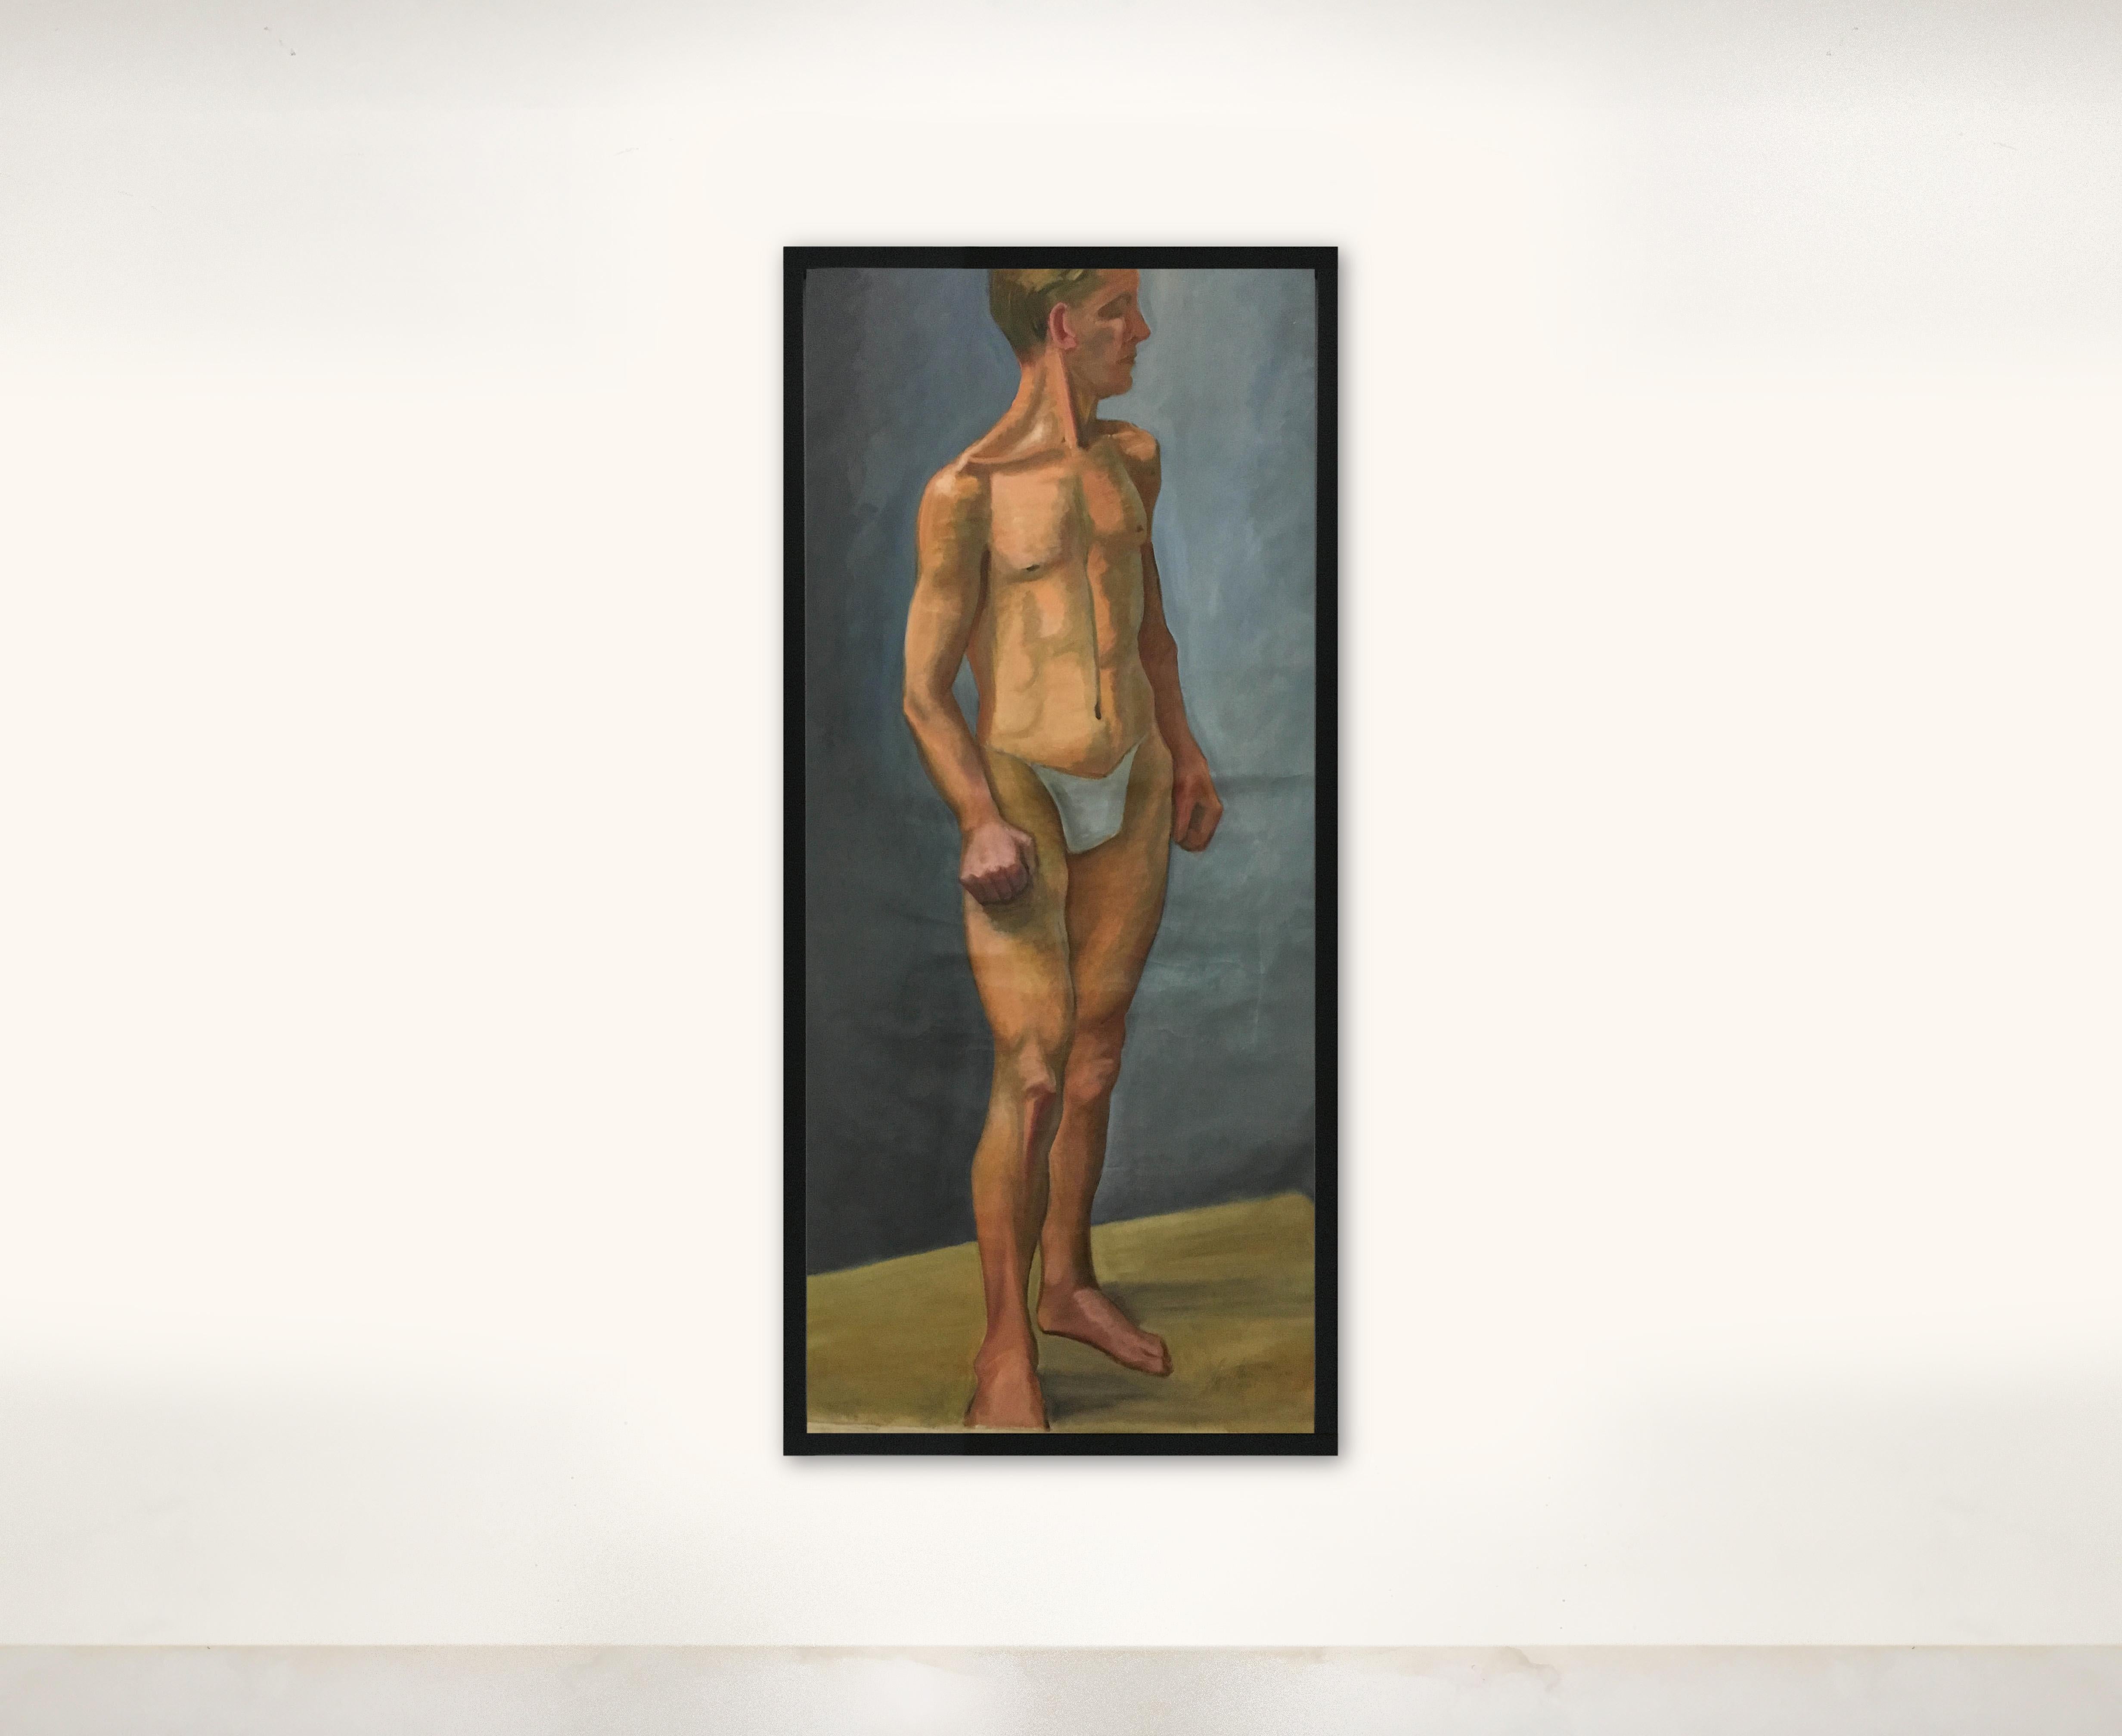 Expressionist 1933 Male 'White' Men Nude Portrait Study Oil Painting by Olga von Mossig-Zupan For Sale